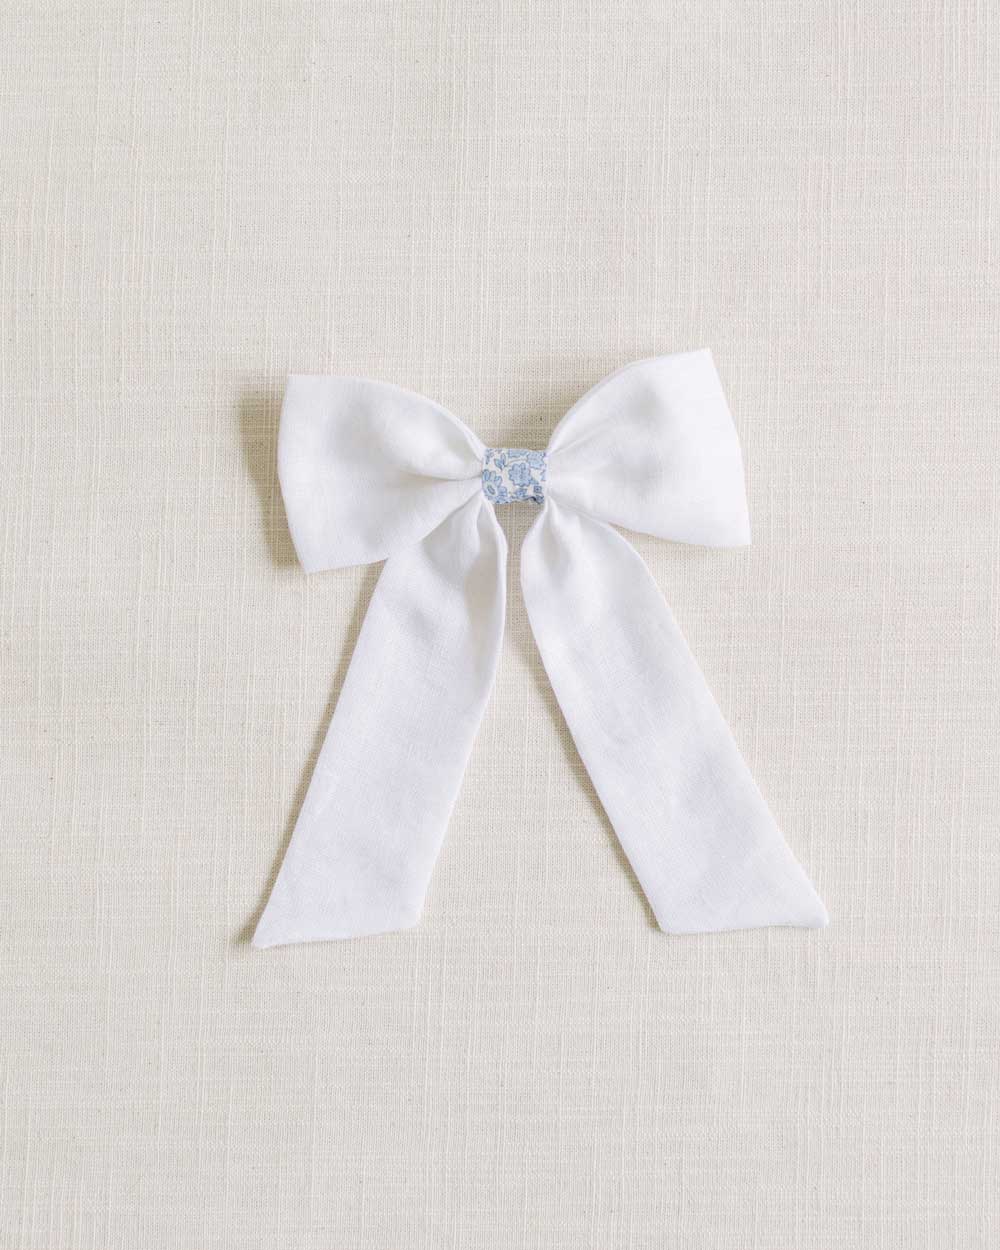 THE WHITE AND BLUE CHILDREN'S BOW